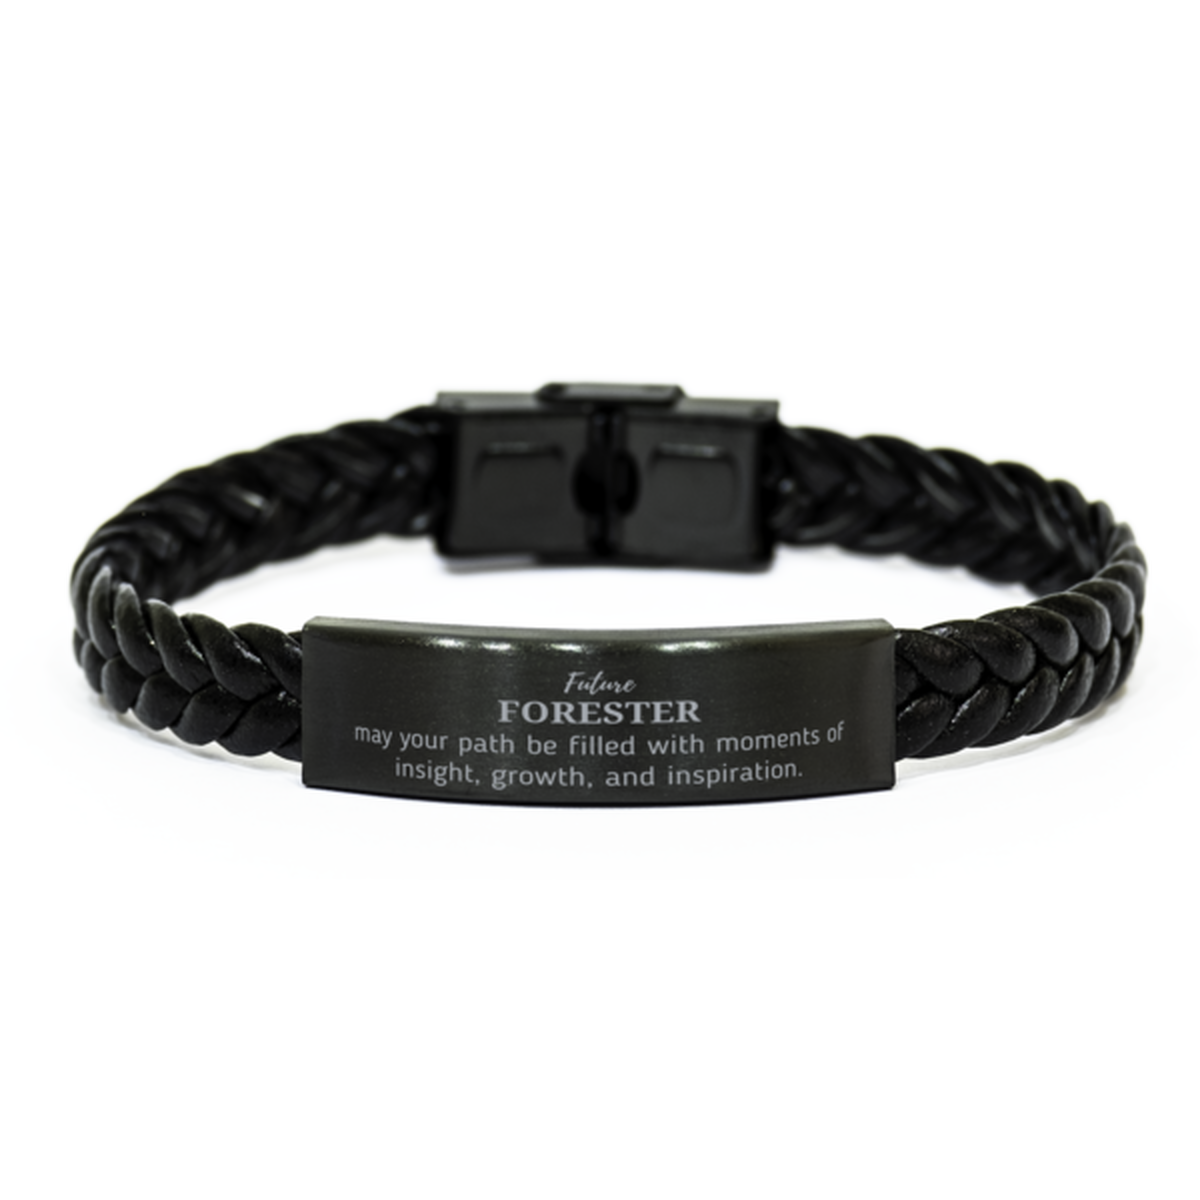 Future Forester Gifts, May your path be filled with moments of insight, Graduation Gifts for New Forester, Christmas Unique Braided Leather Bracelet For Men, Women, Friends